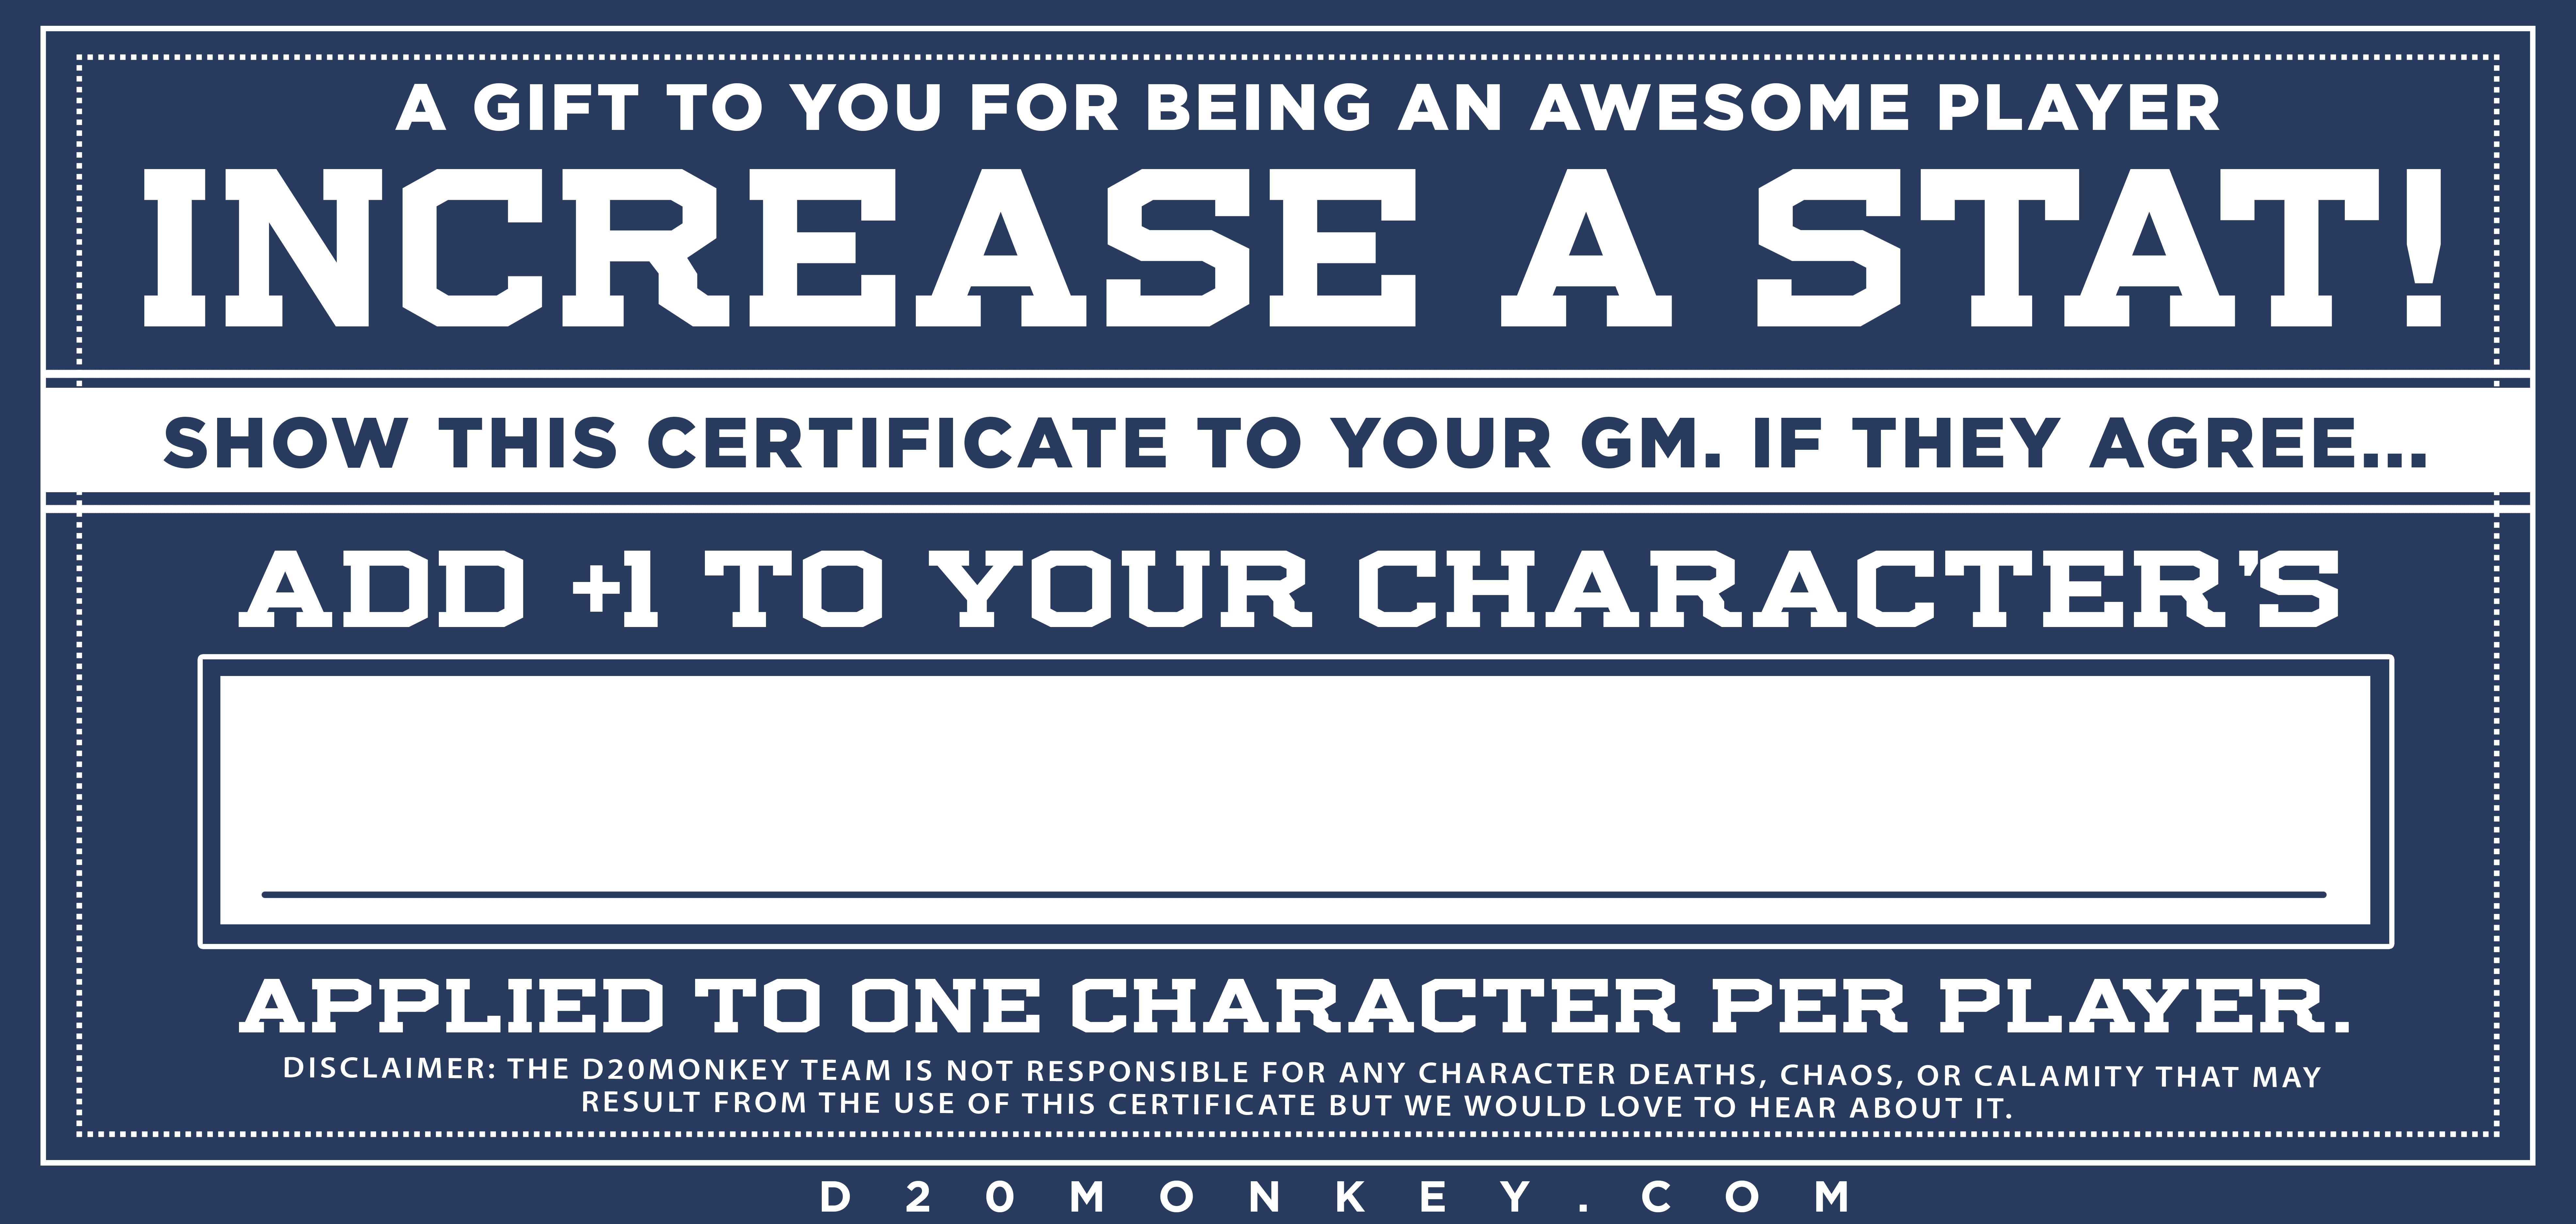 Your character is awesome. Why shouldn't they be a little MORE awesome? 